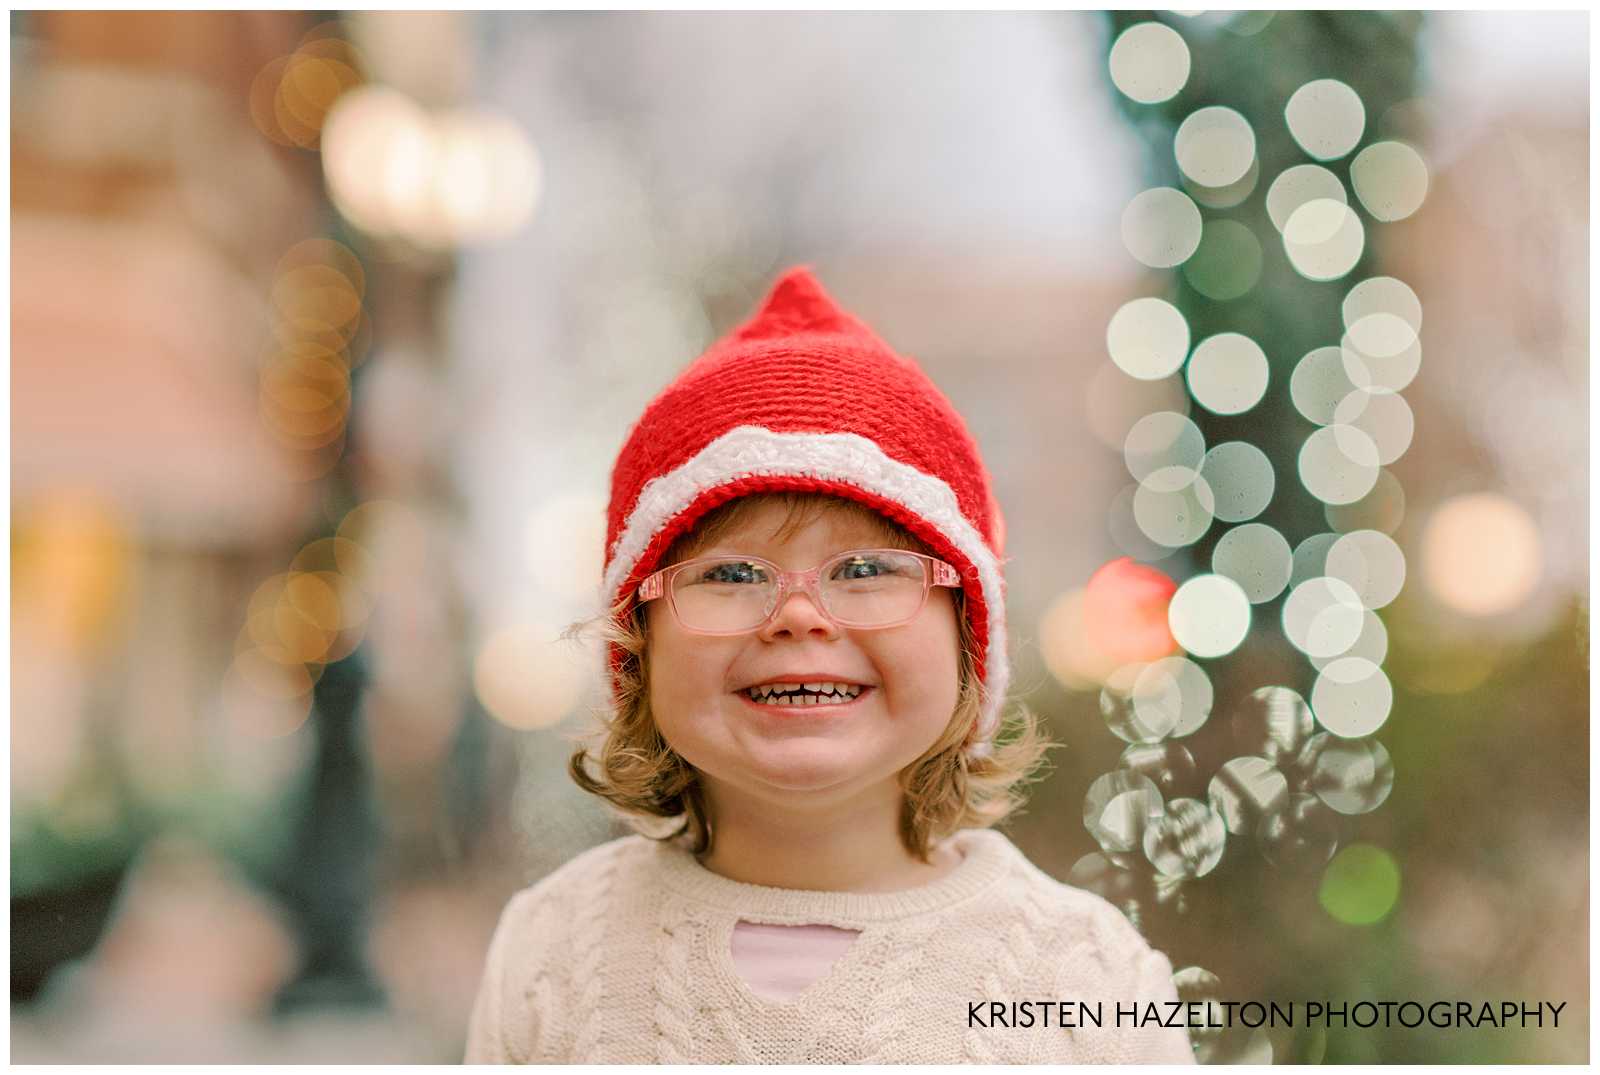 Little girl in a red Santa hat and white sweater dress grinning as she looks at holiday lights in Chicago.